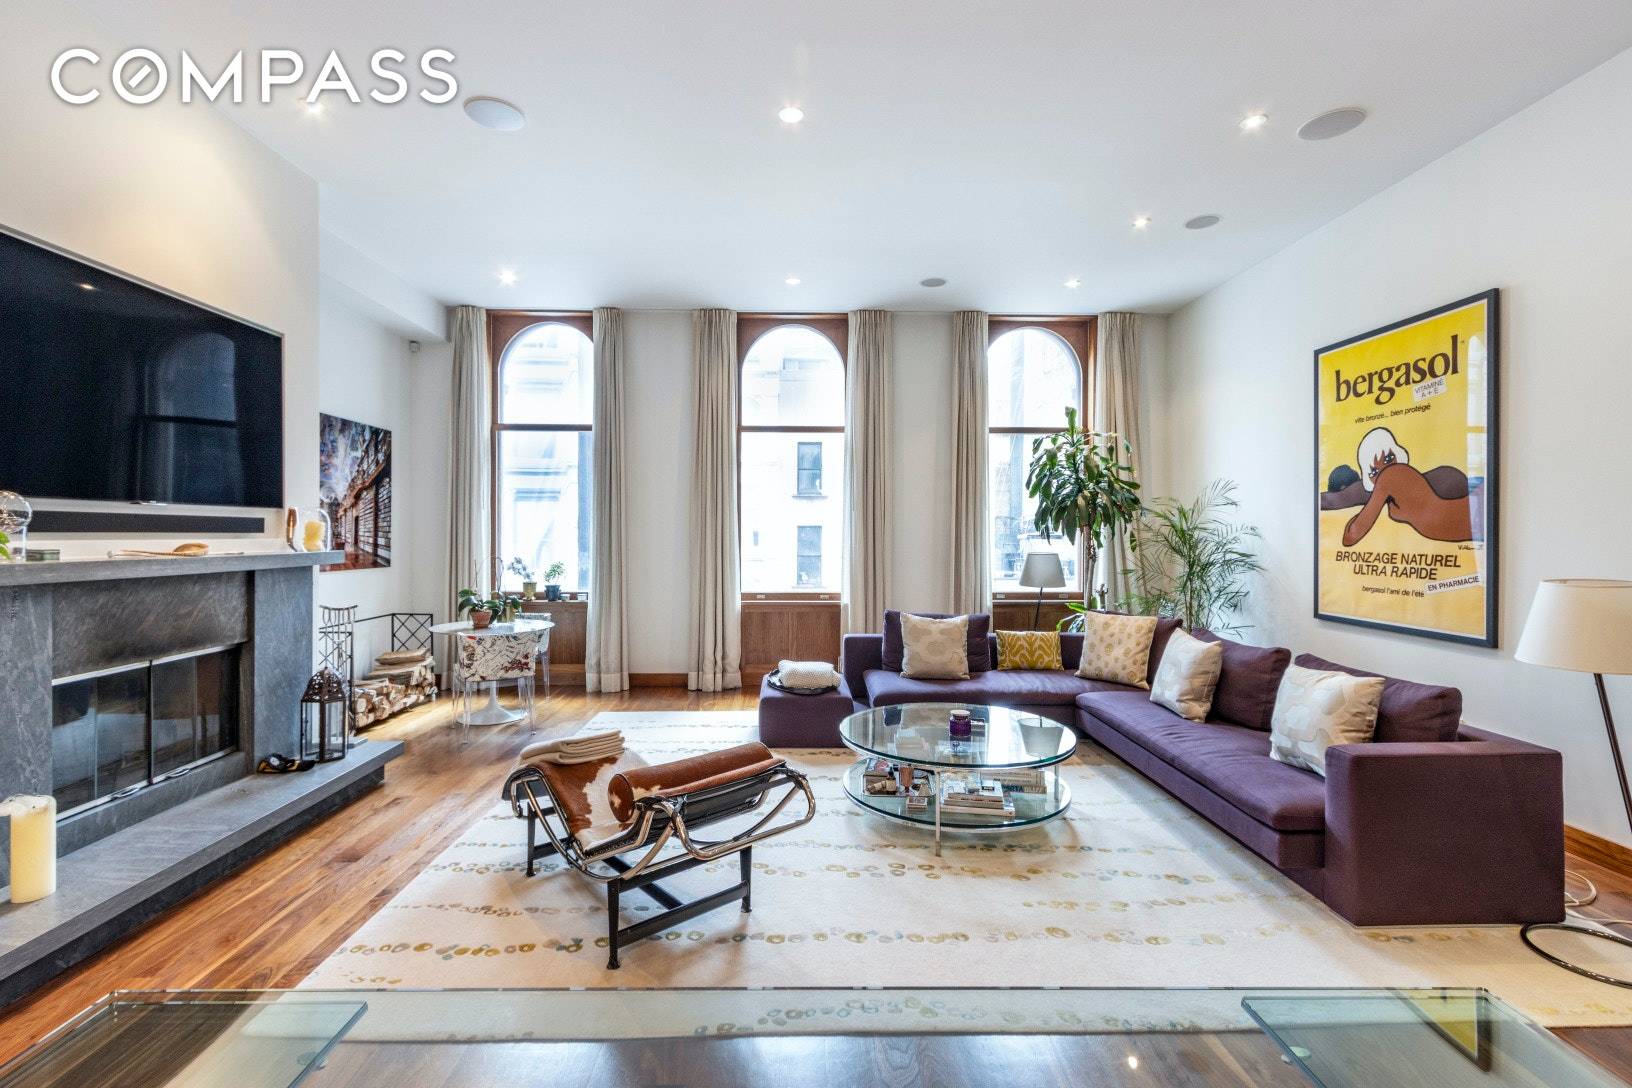 Located in a boutique doorman building on cobblestoned Mercer Street, this is the quintessential Soho loft you re dreaming of.